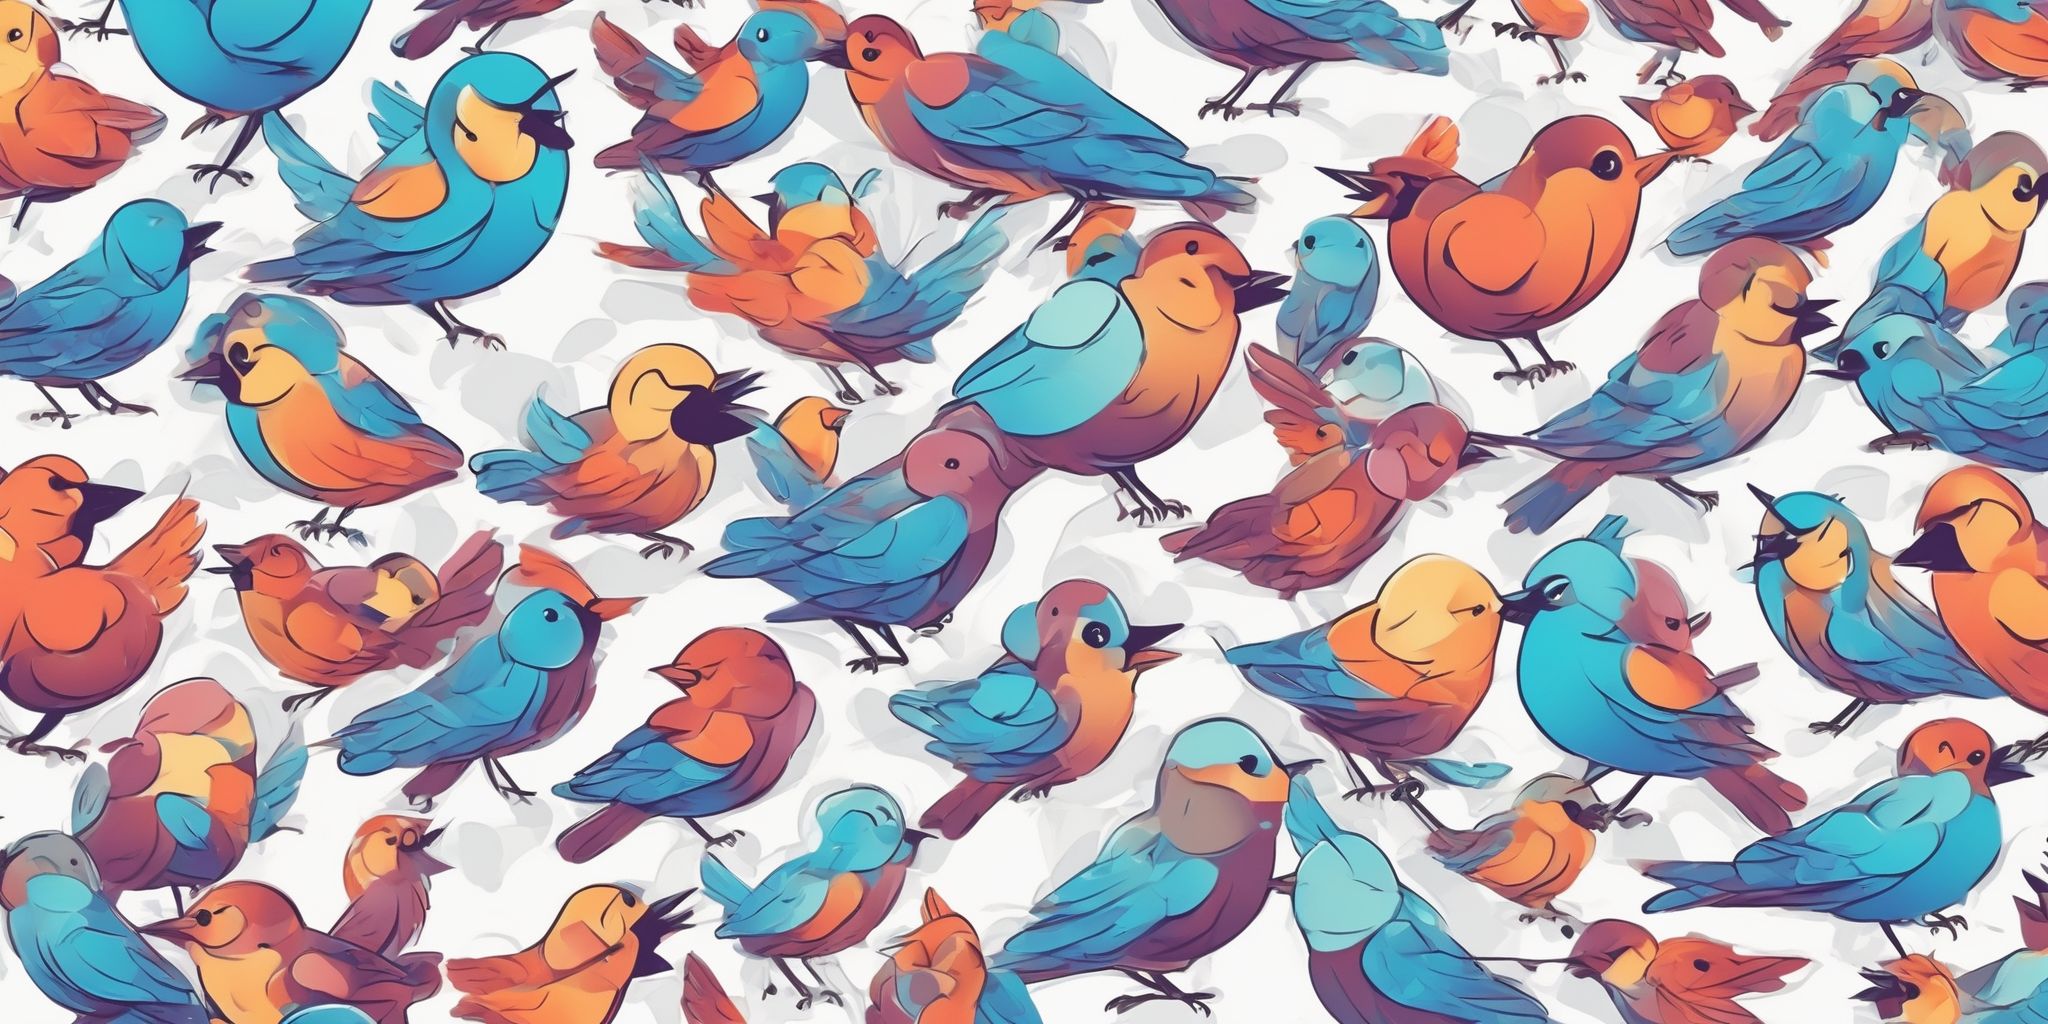 Twitter: Tweetstorm in illustration style with gradients and white background